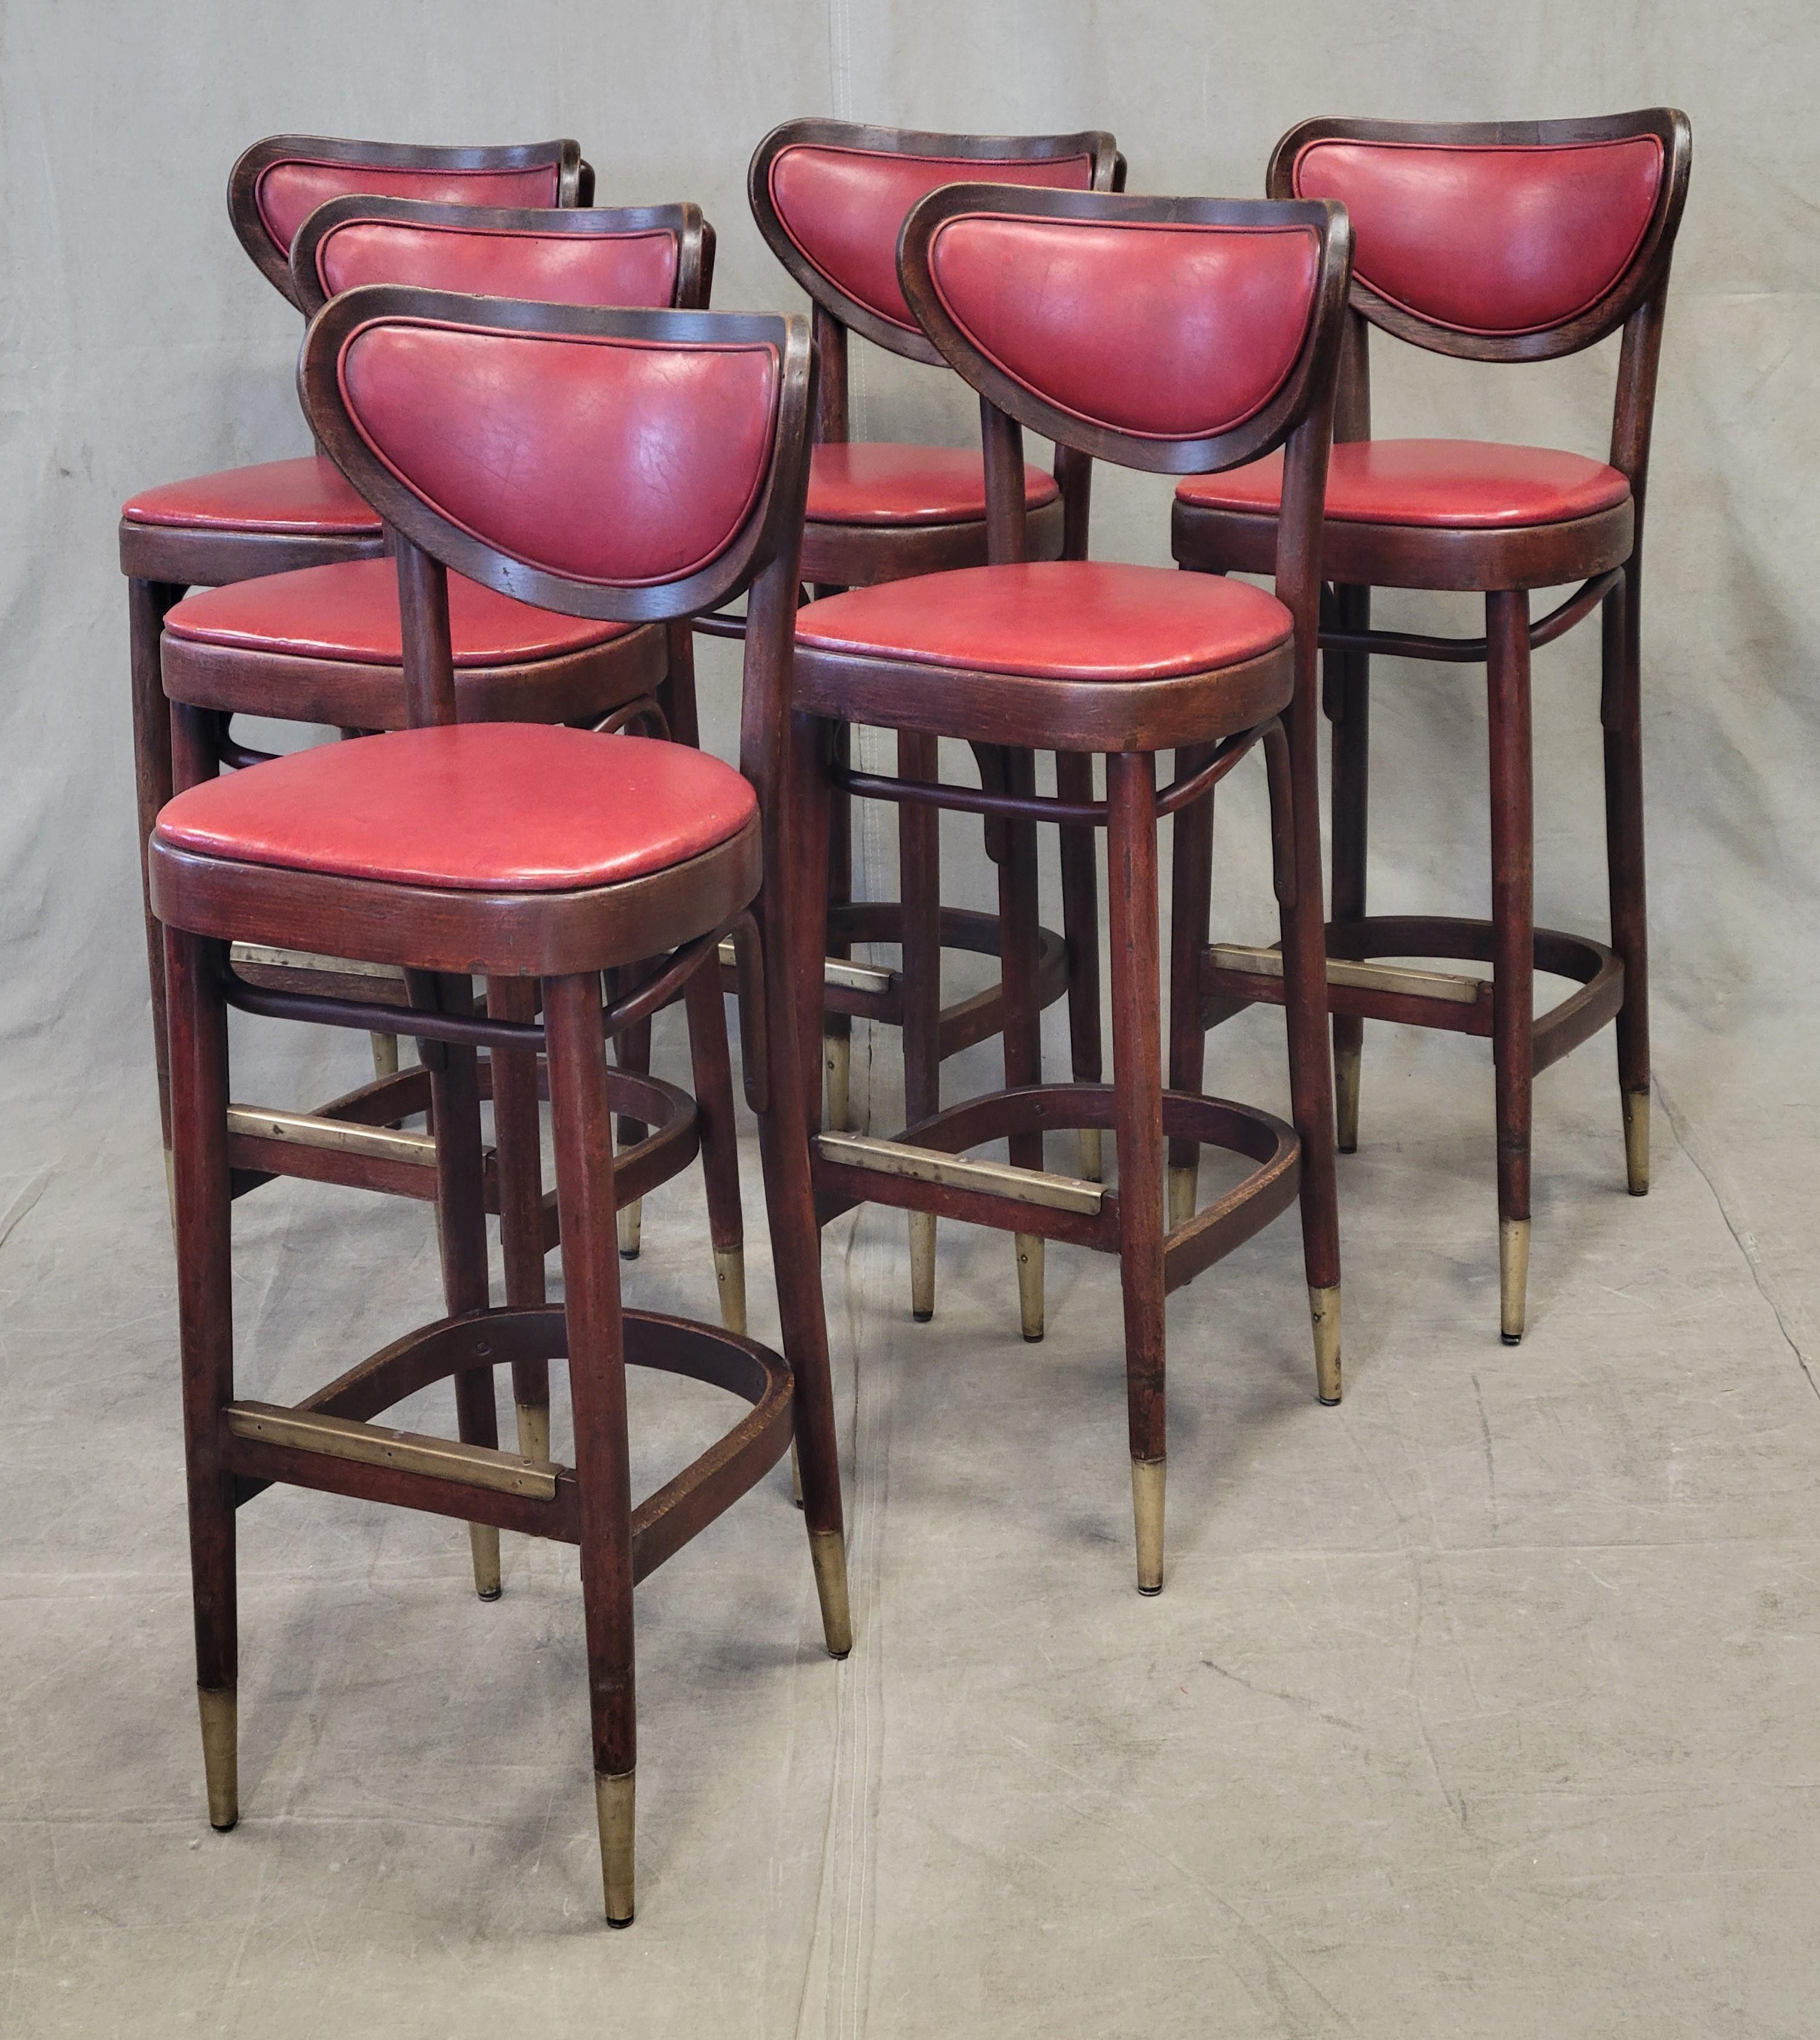 A classic set of 6 vintage 1930s bentwood bar stools with original red vinyl upholstery and brass feet and footrest. Stools are sturdy and ready to be used. Wood is a rich mahogany brown tone. Old red vinyl is high quality and has great worn patina.